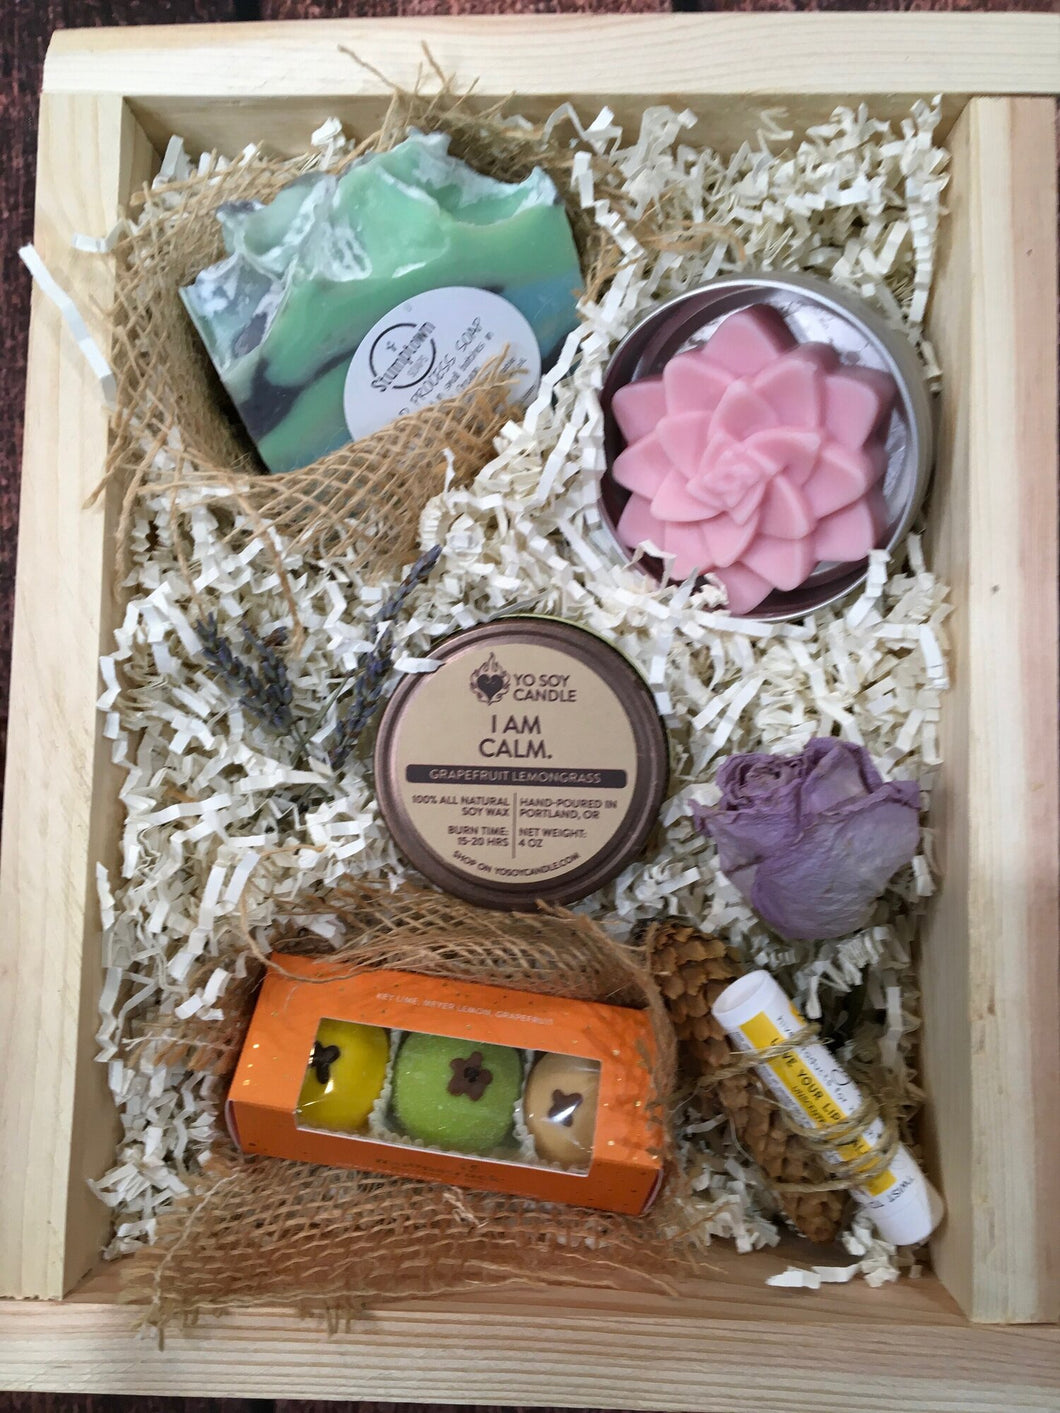 Sample box containing body butter, soap, soy candle, chocolate truffles, and lip balm.